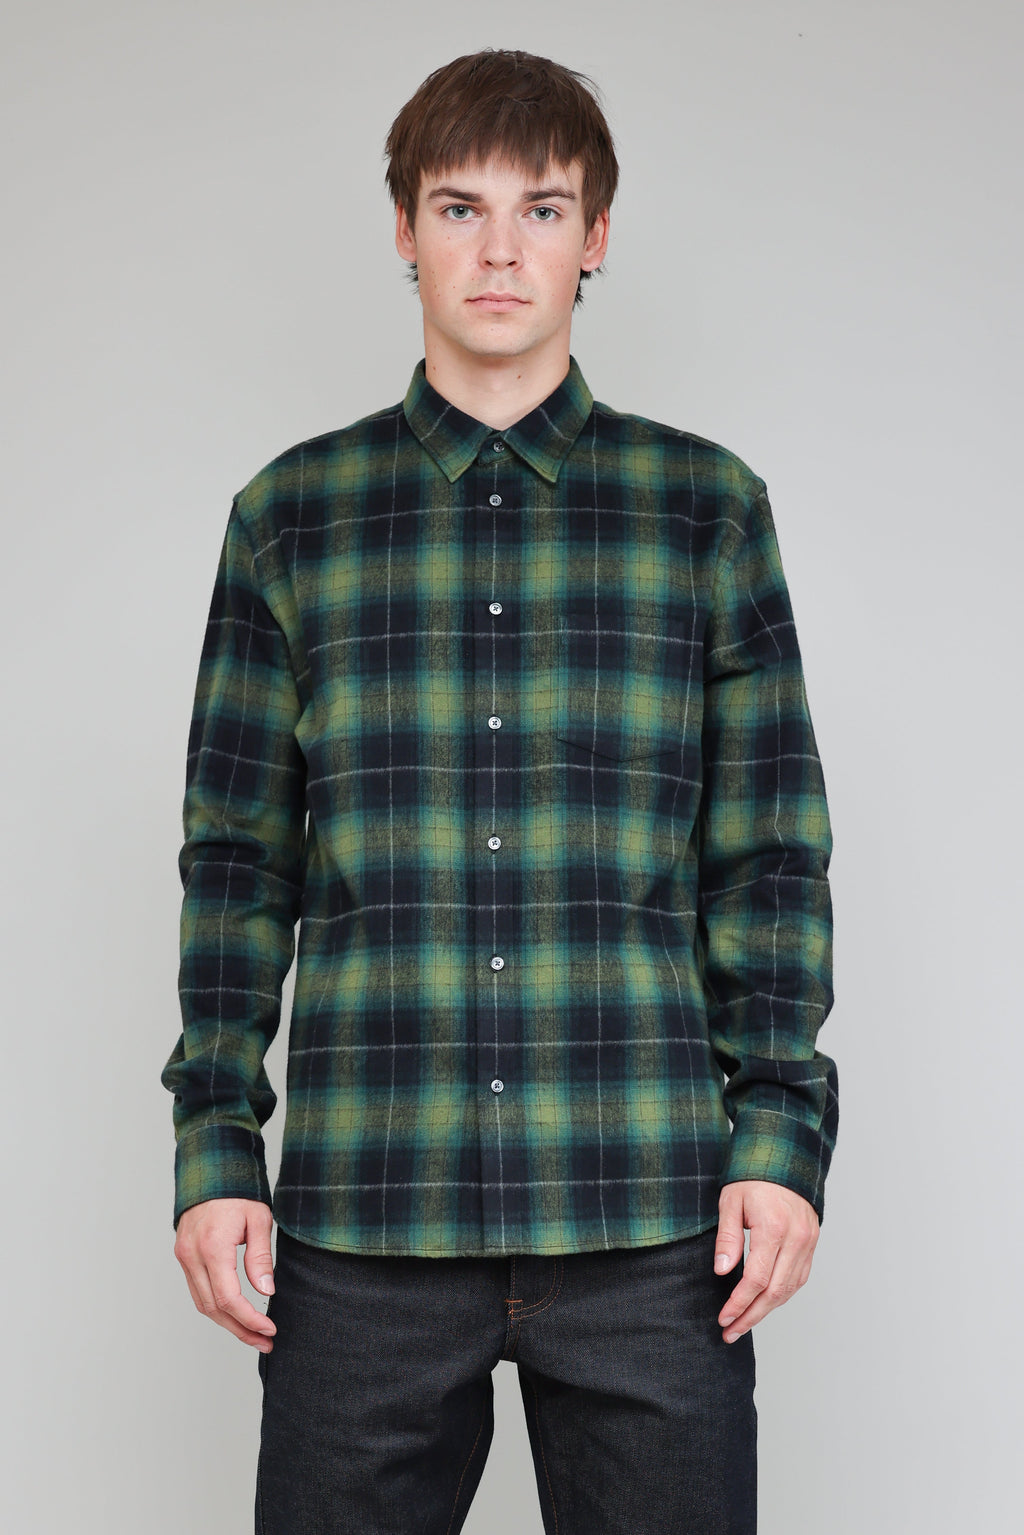 Japanese Shaggy Plaid in Green and Navy 01